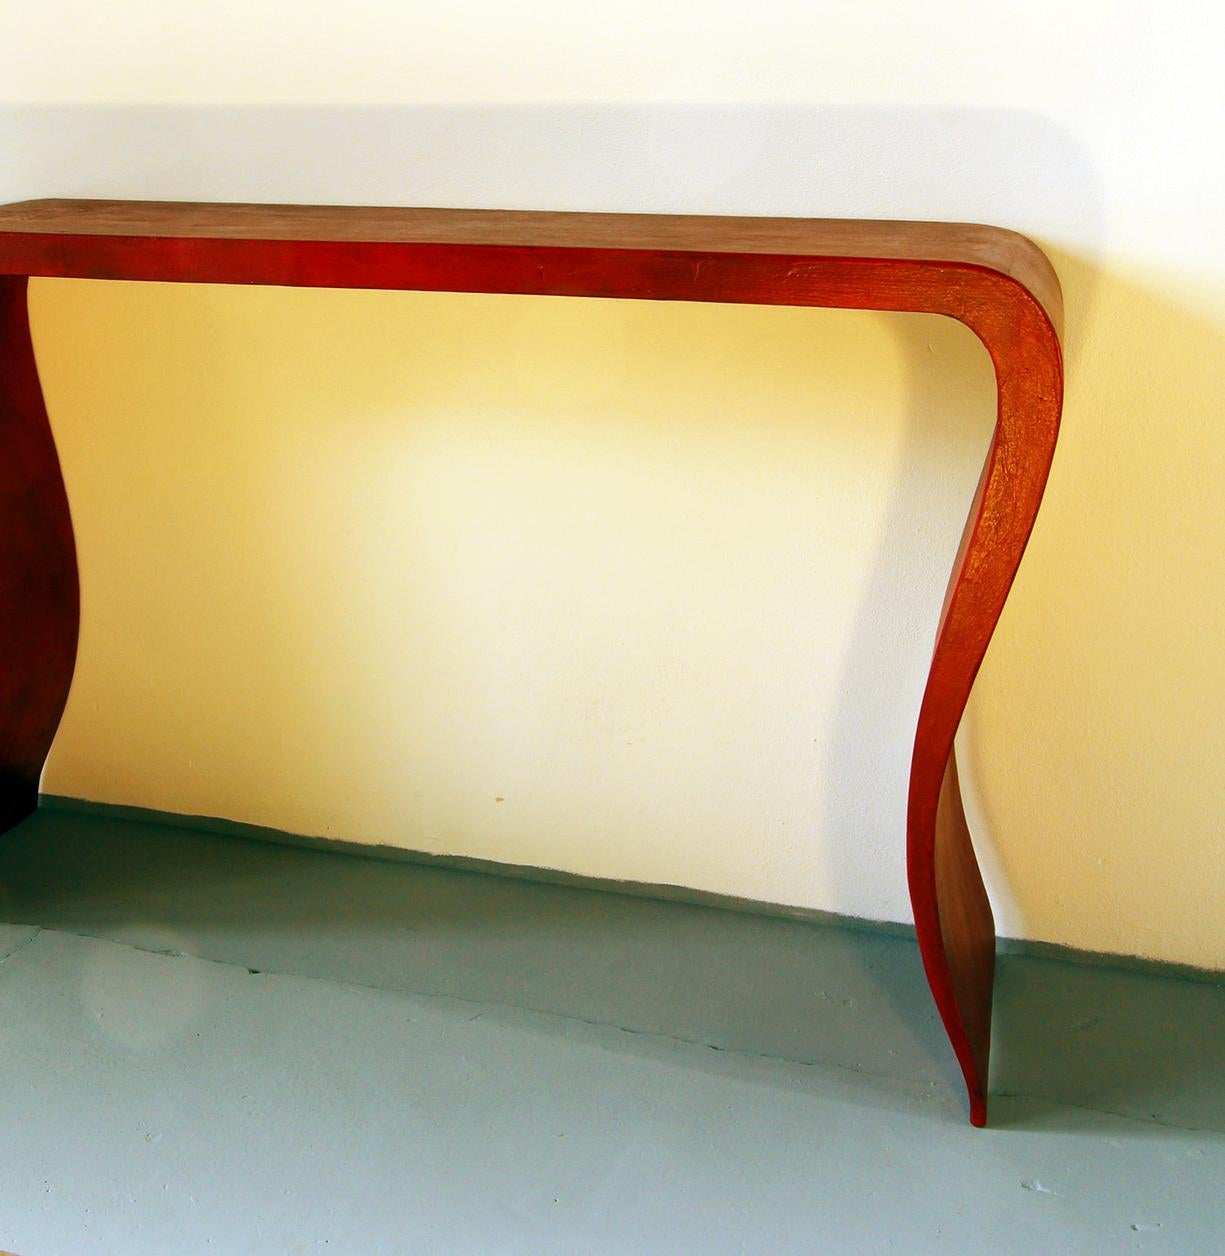 Lacquered 20th century Chinese console table in red lacquered wood.